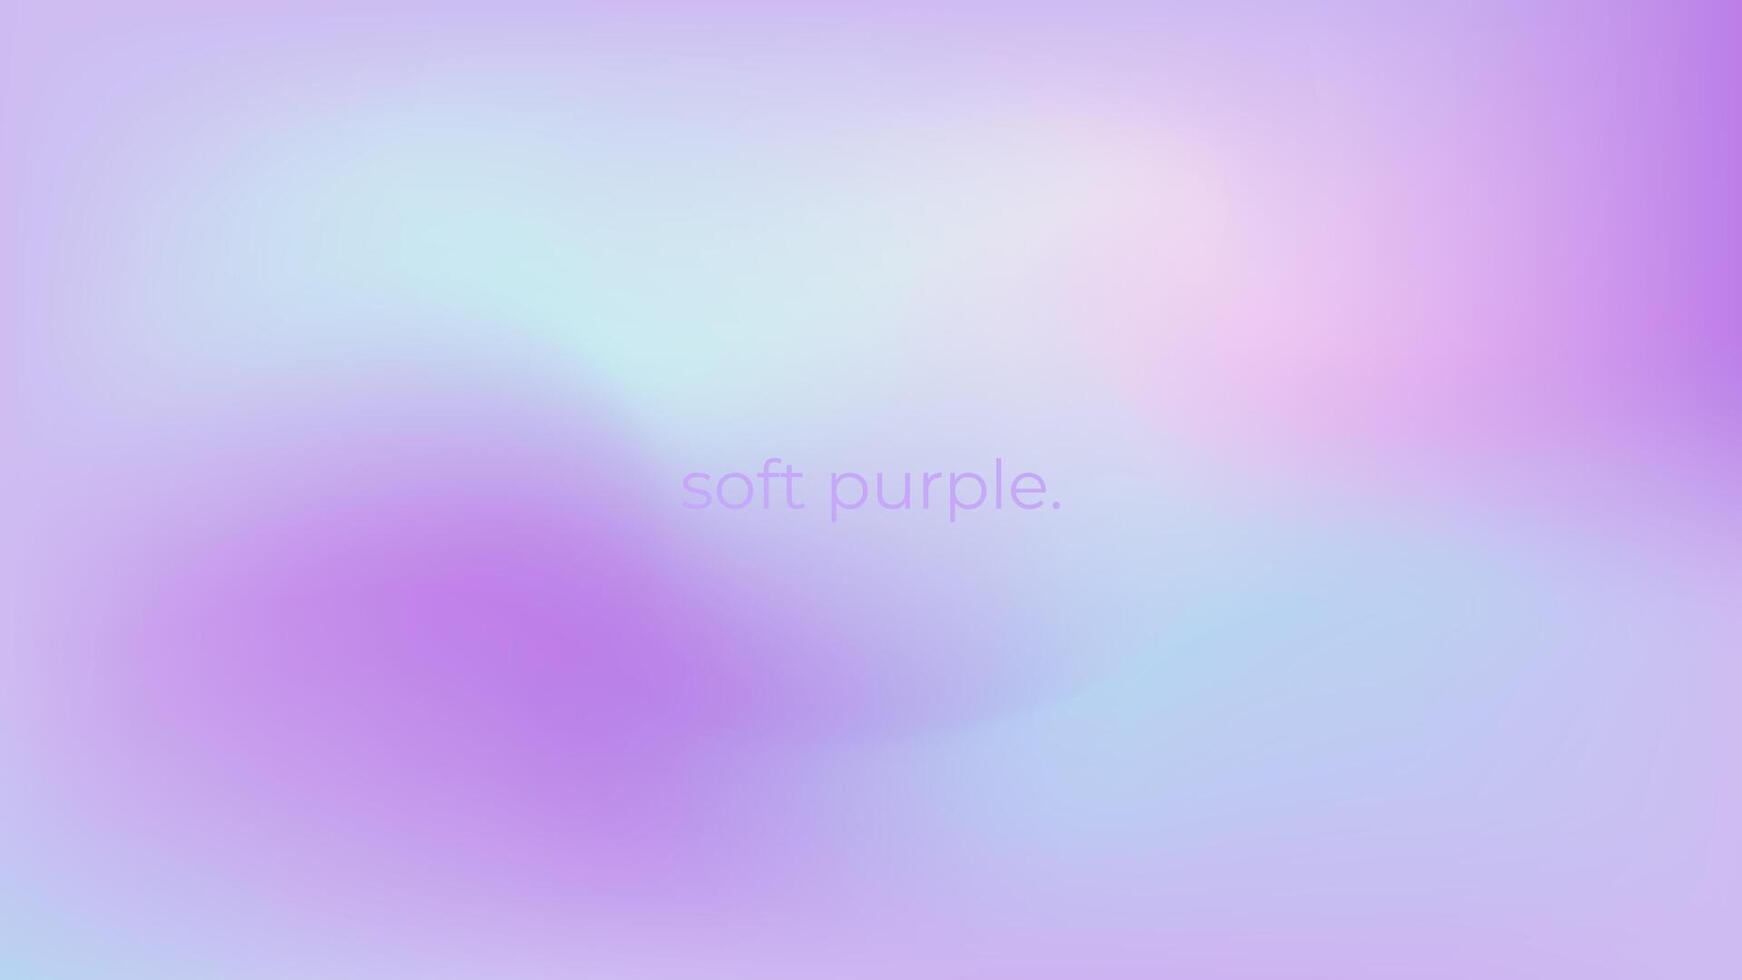 Abstract blurred gradient background in soft purple colors. For covers, wallpapers, branding, social media, business cards and more vector